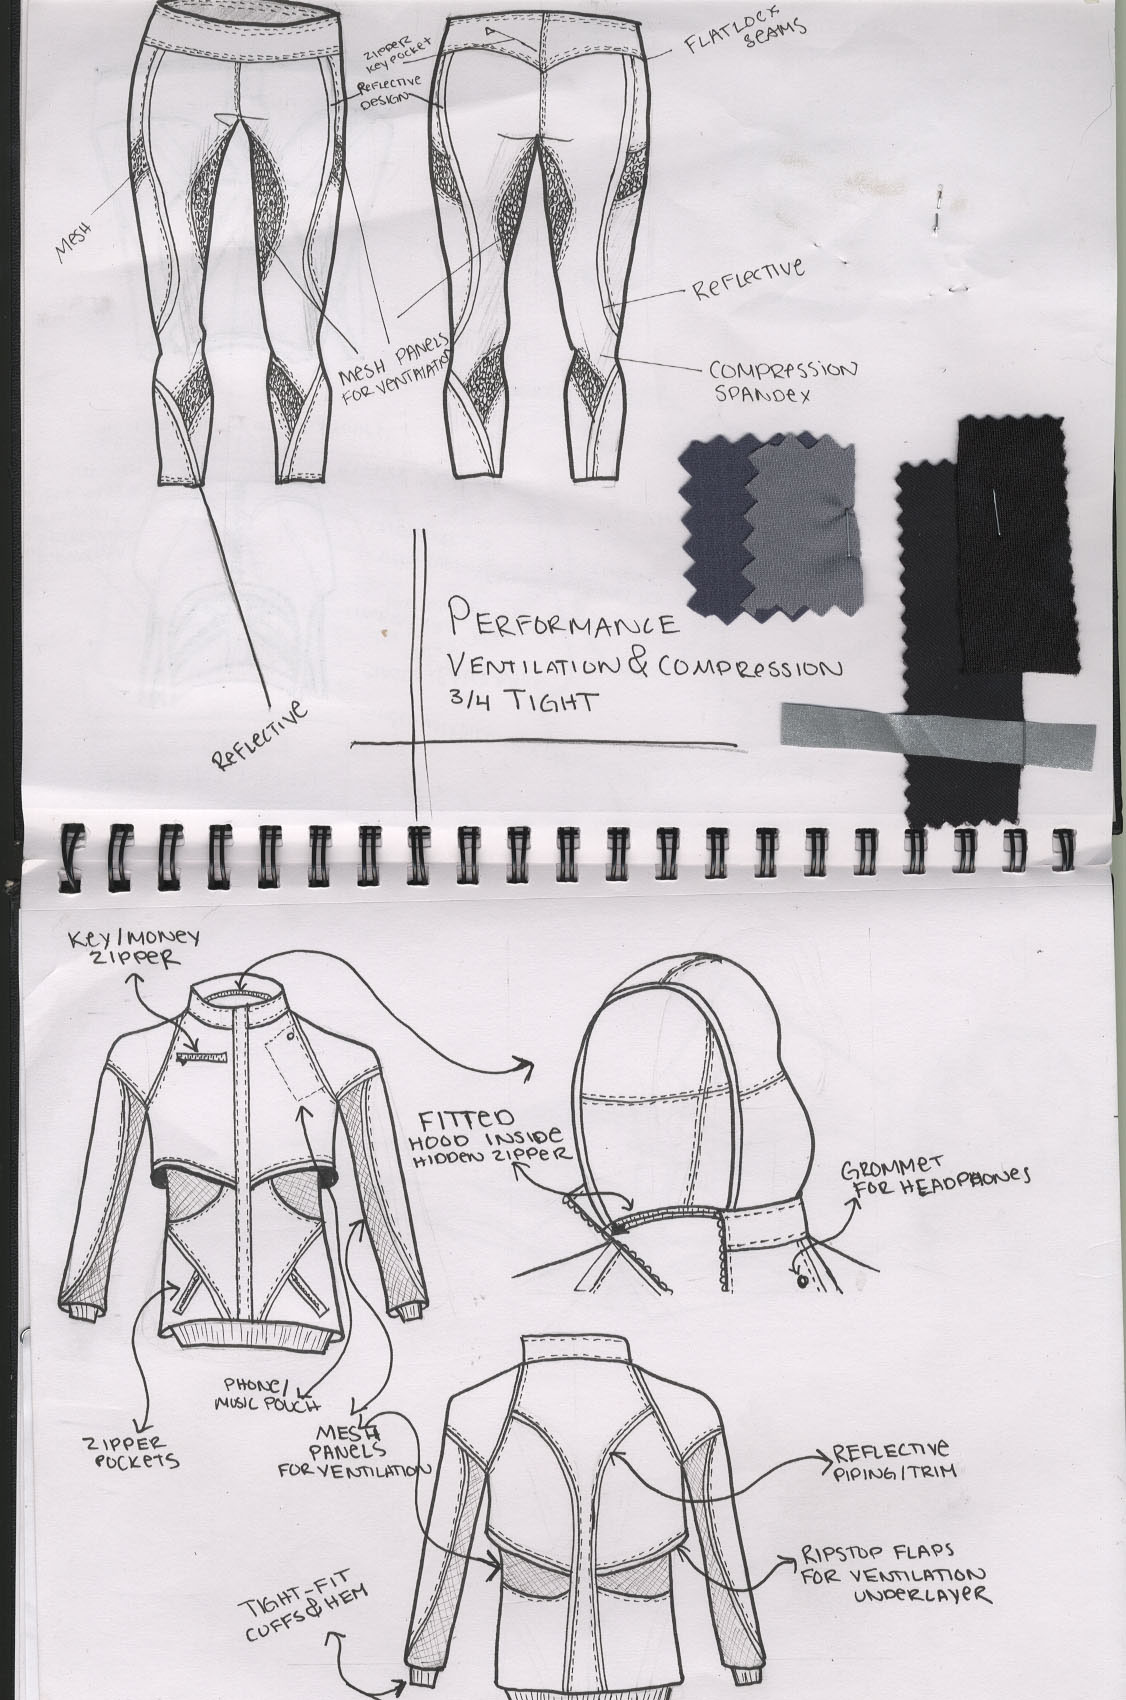 patternmaking Drafting Half Scale thought process High Intensity Performance activewear call-outs rough sketchbook